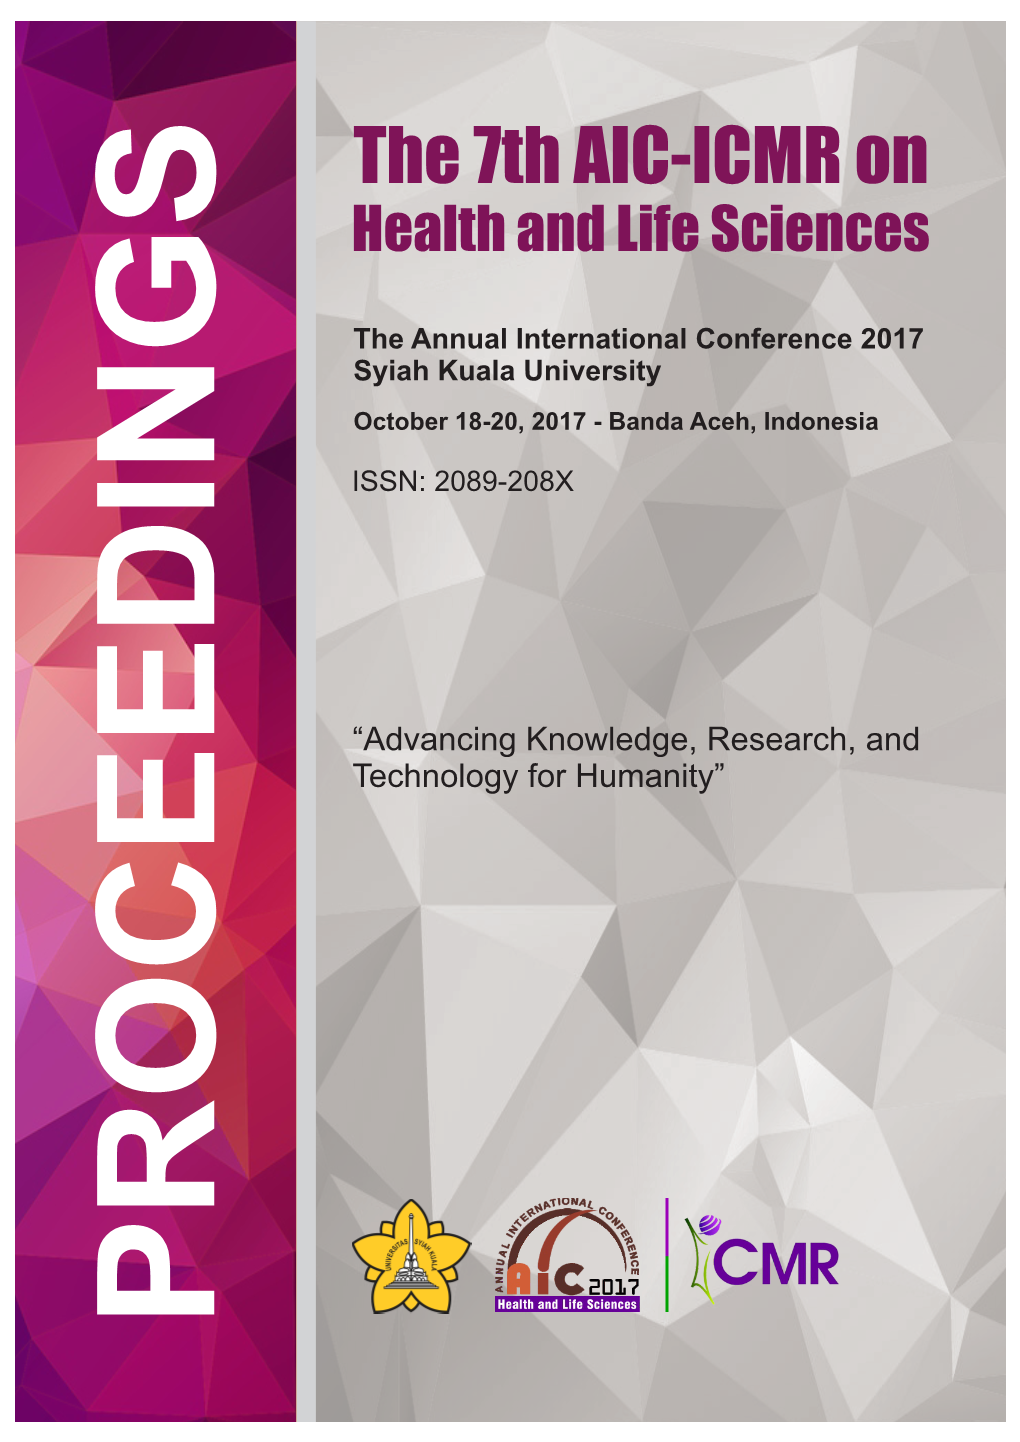 The 7Th AIC-ICMR on Health and Life Sciences